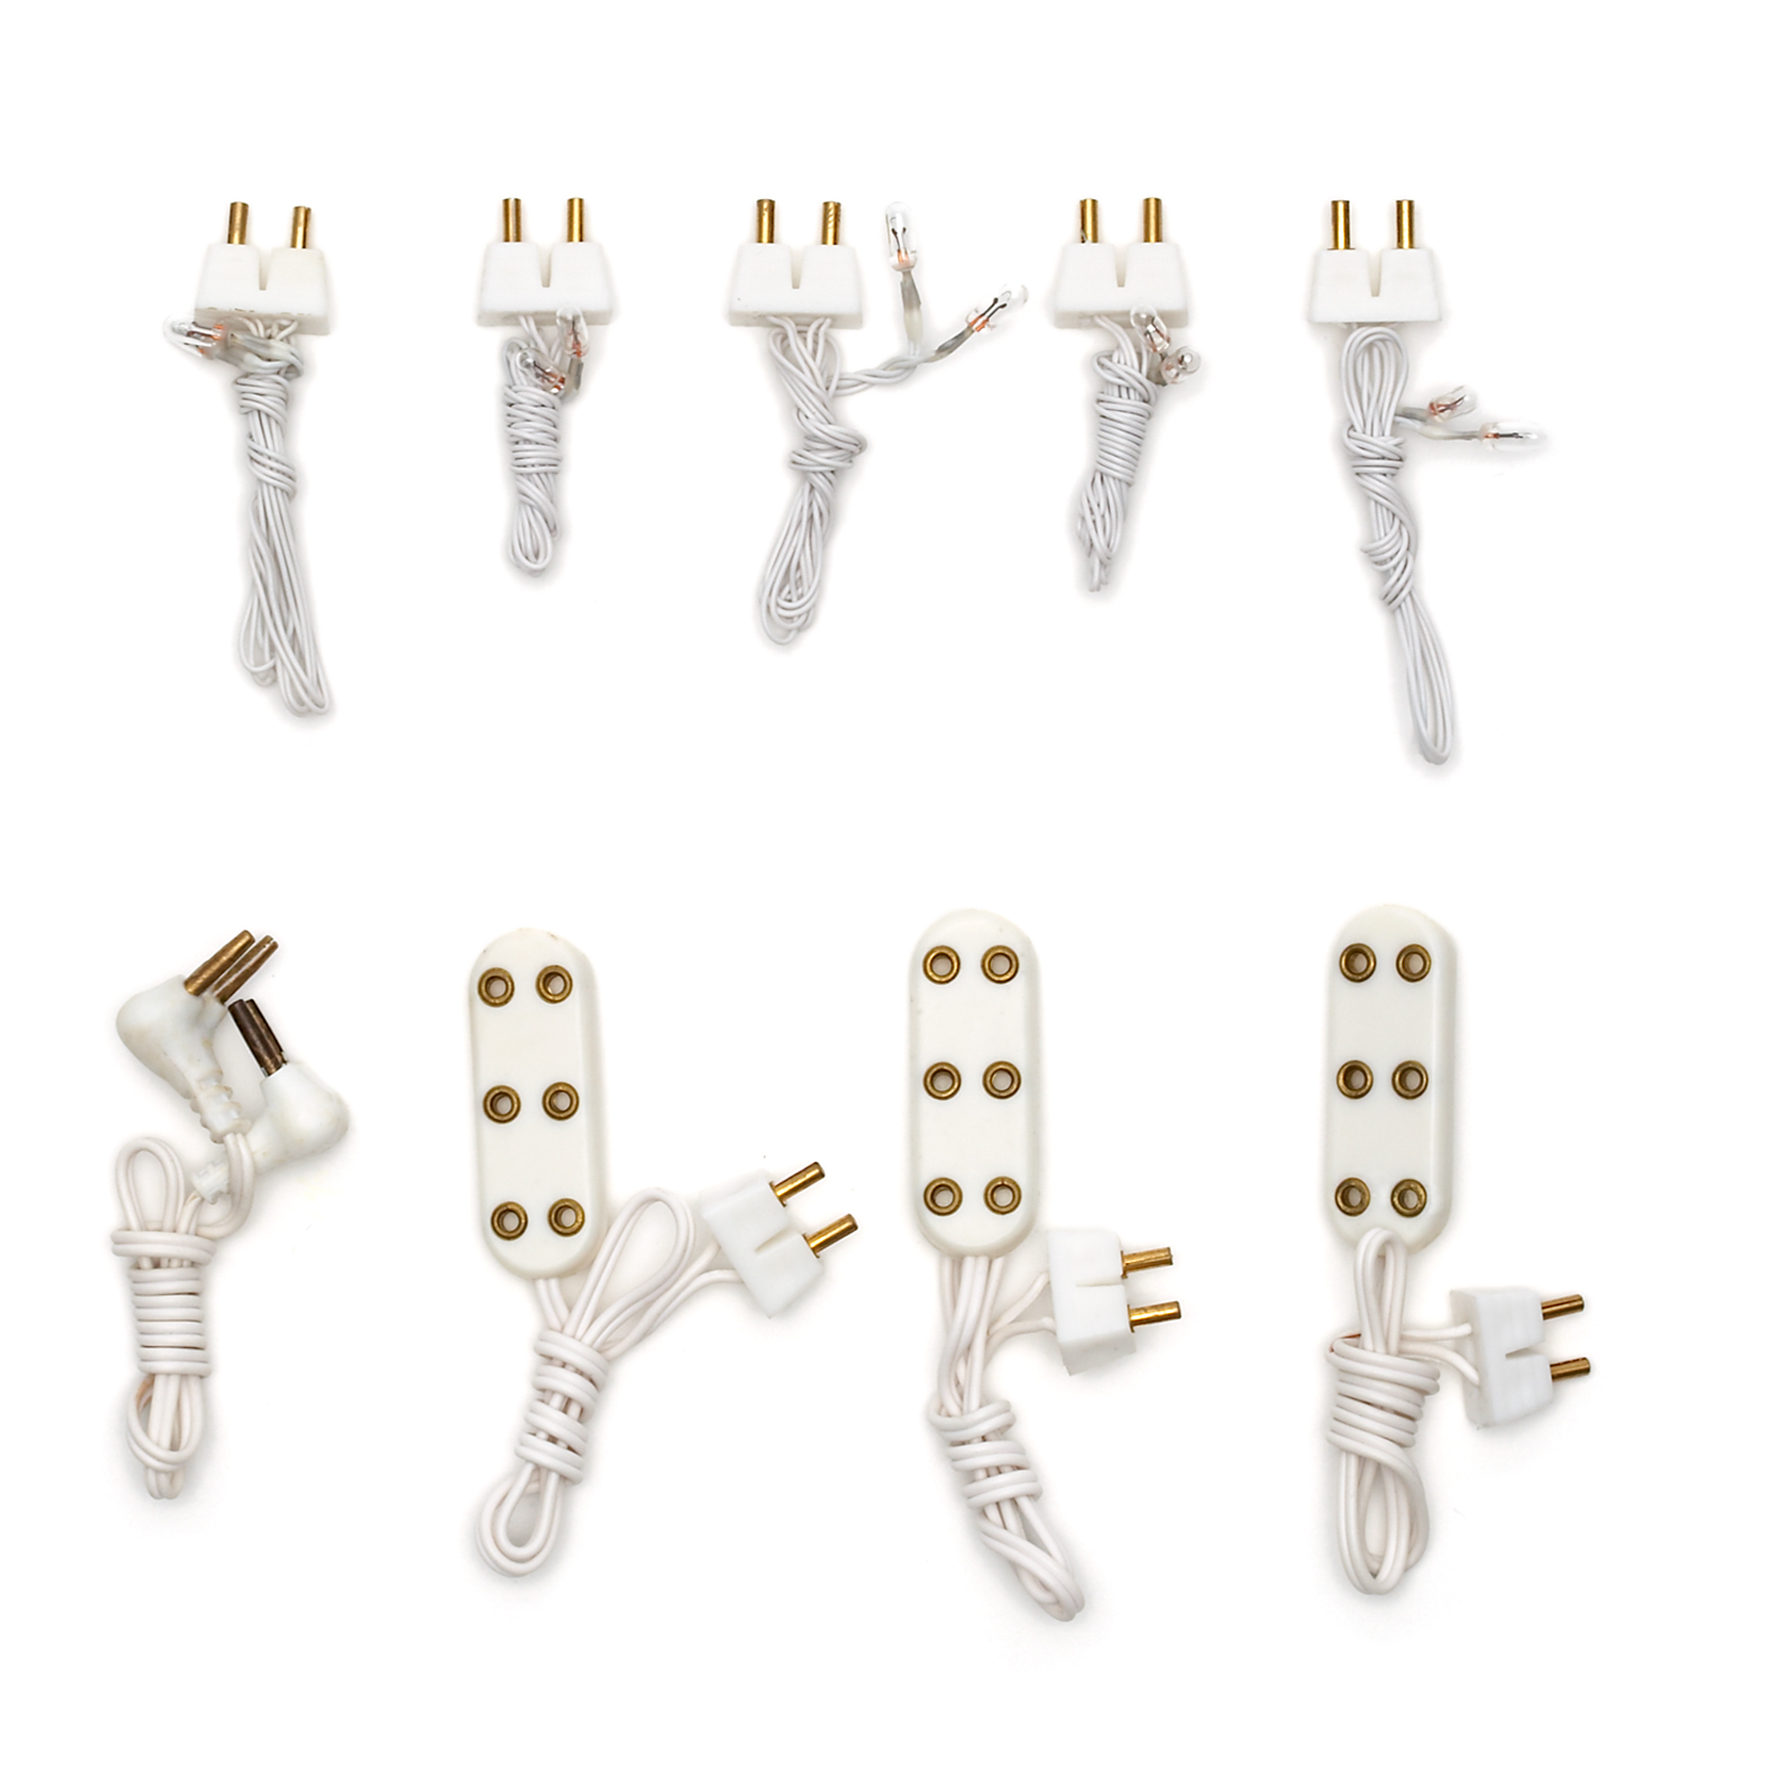 Outlet lundby dollhouse lighting plugs & sockets set plug-in